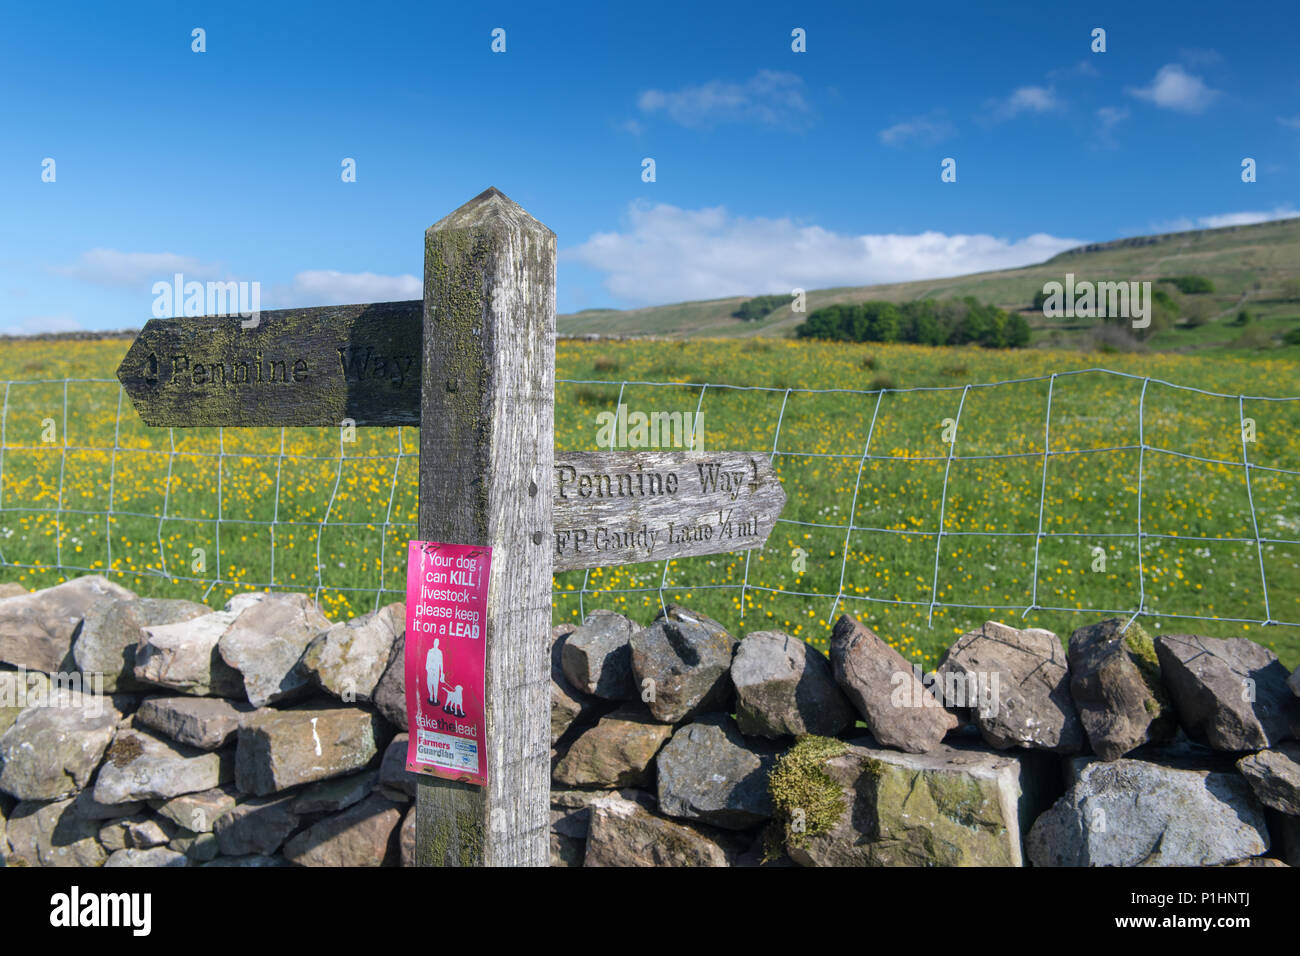 Footpath sign along the Pennine Way near Hawes, North Yorkshire, with a warning sign for dog owners to keep dogs on leads. Stock Photo